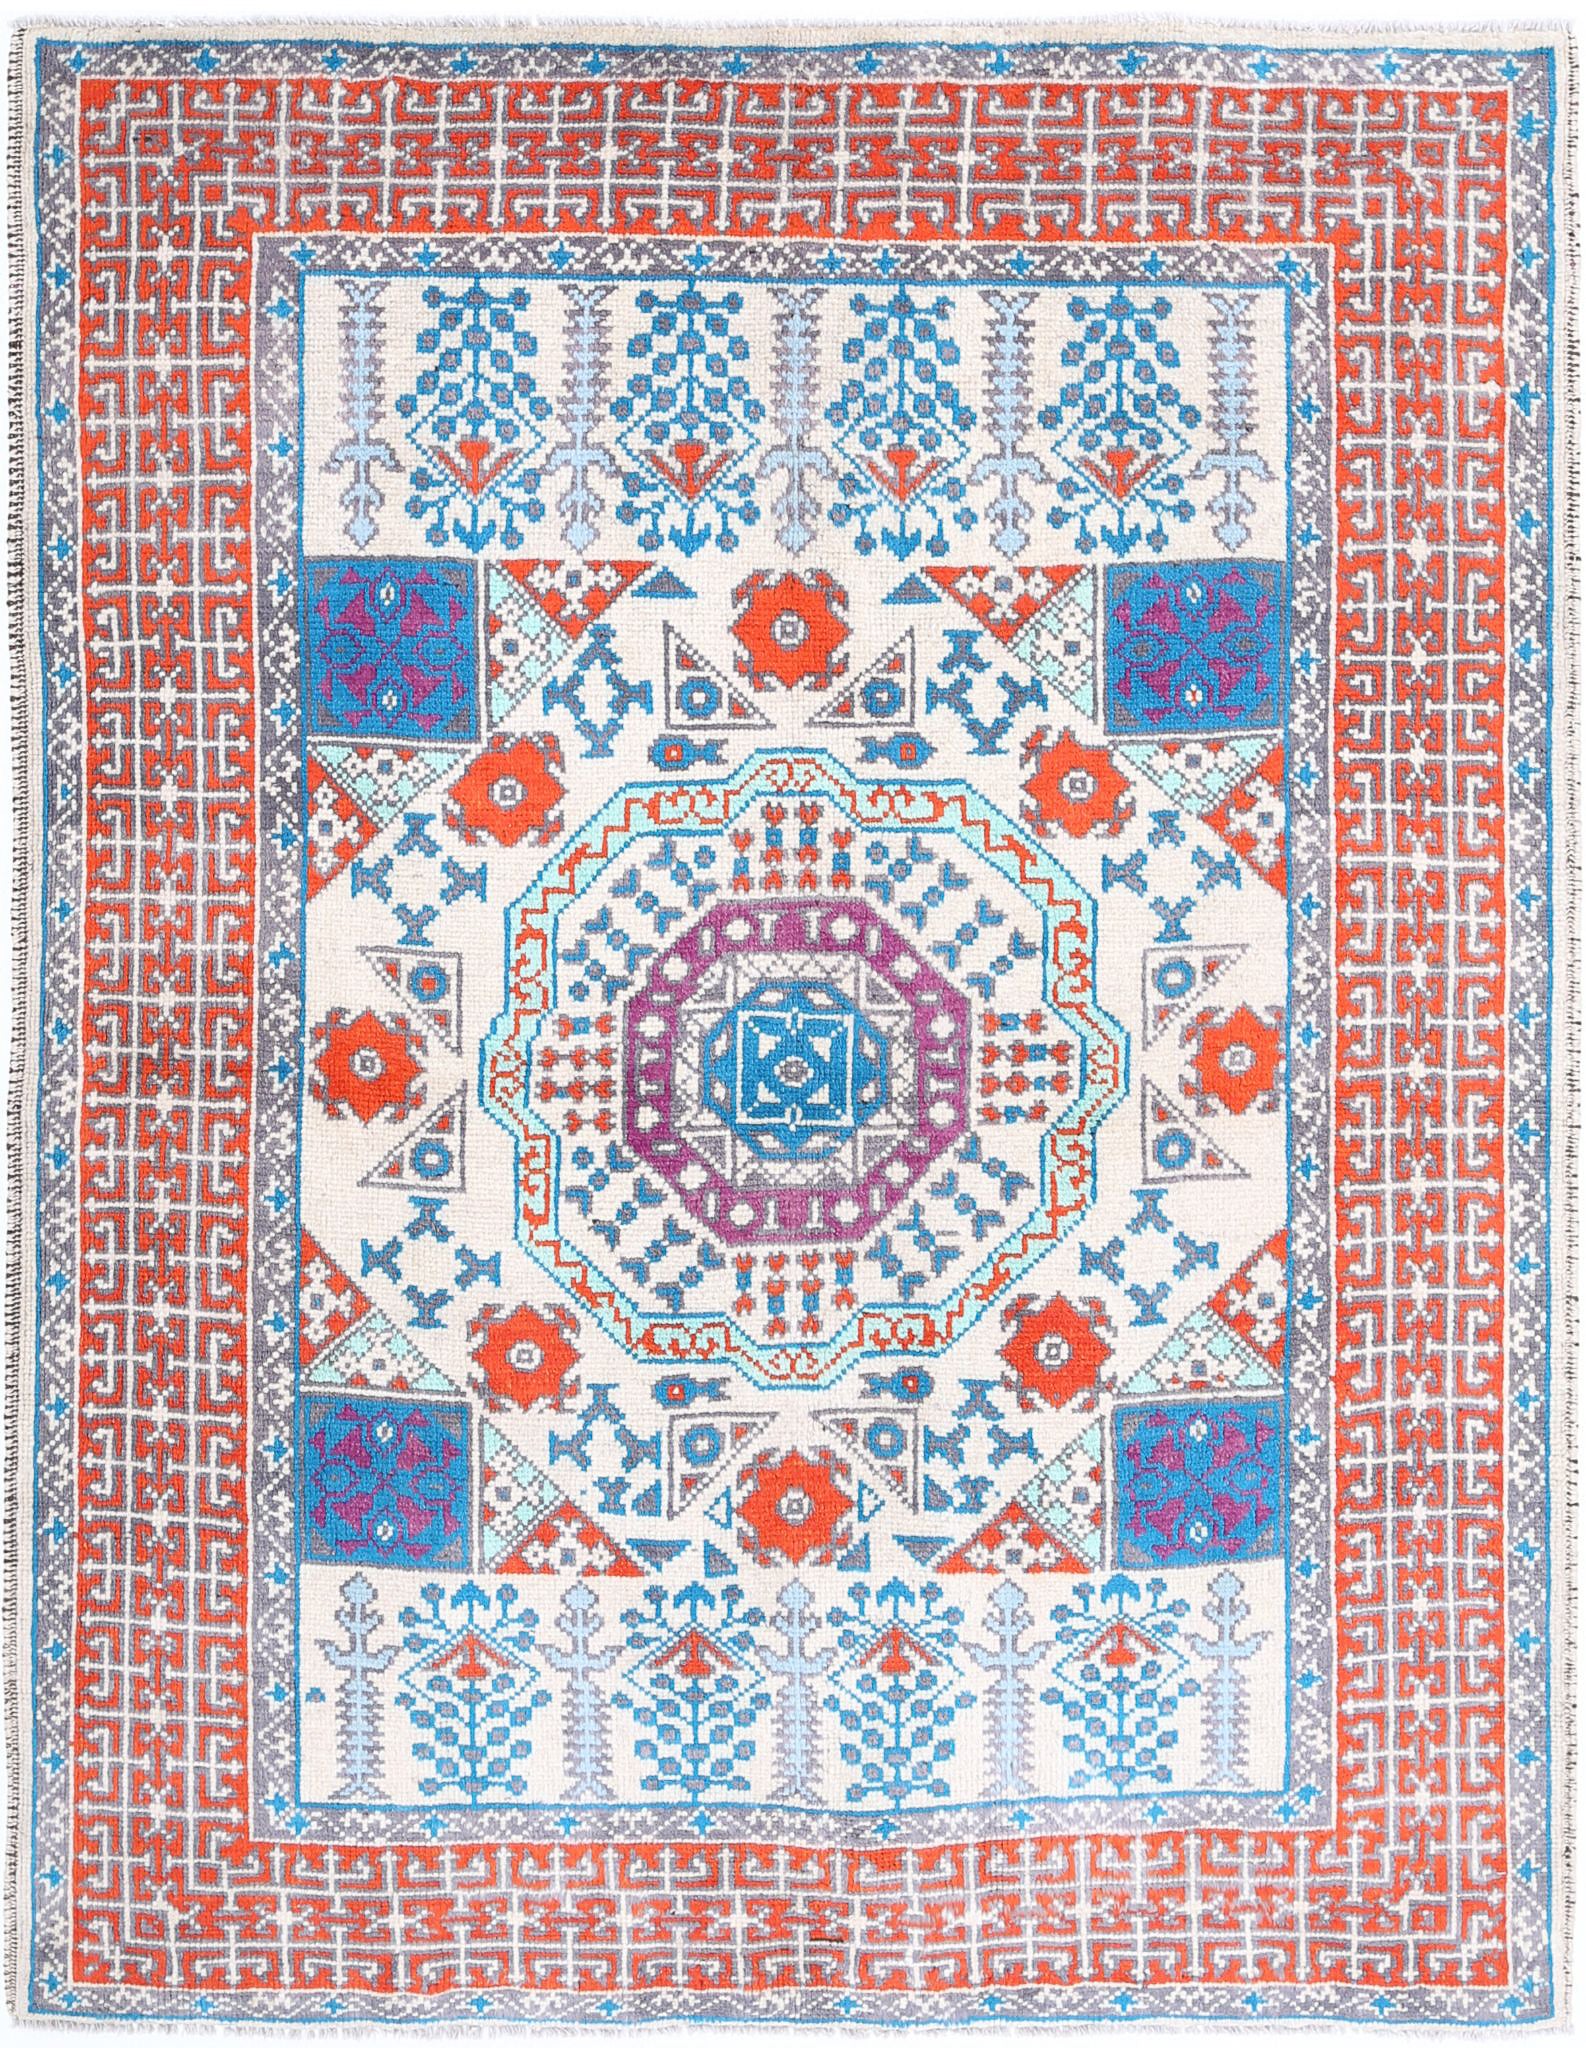 Revival-hand-knotted-qarghani-wool-rug-5014092.jpg